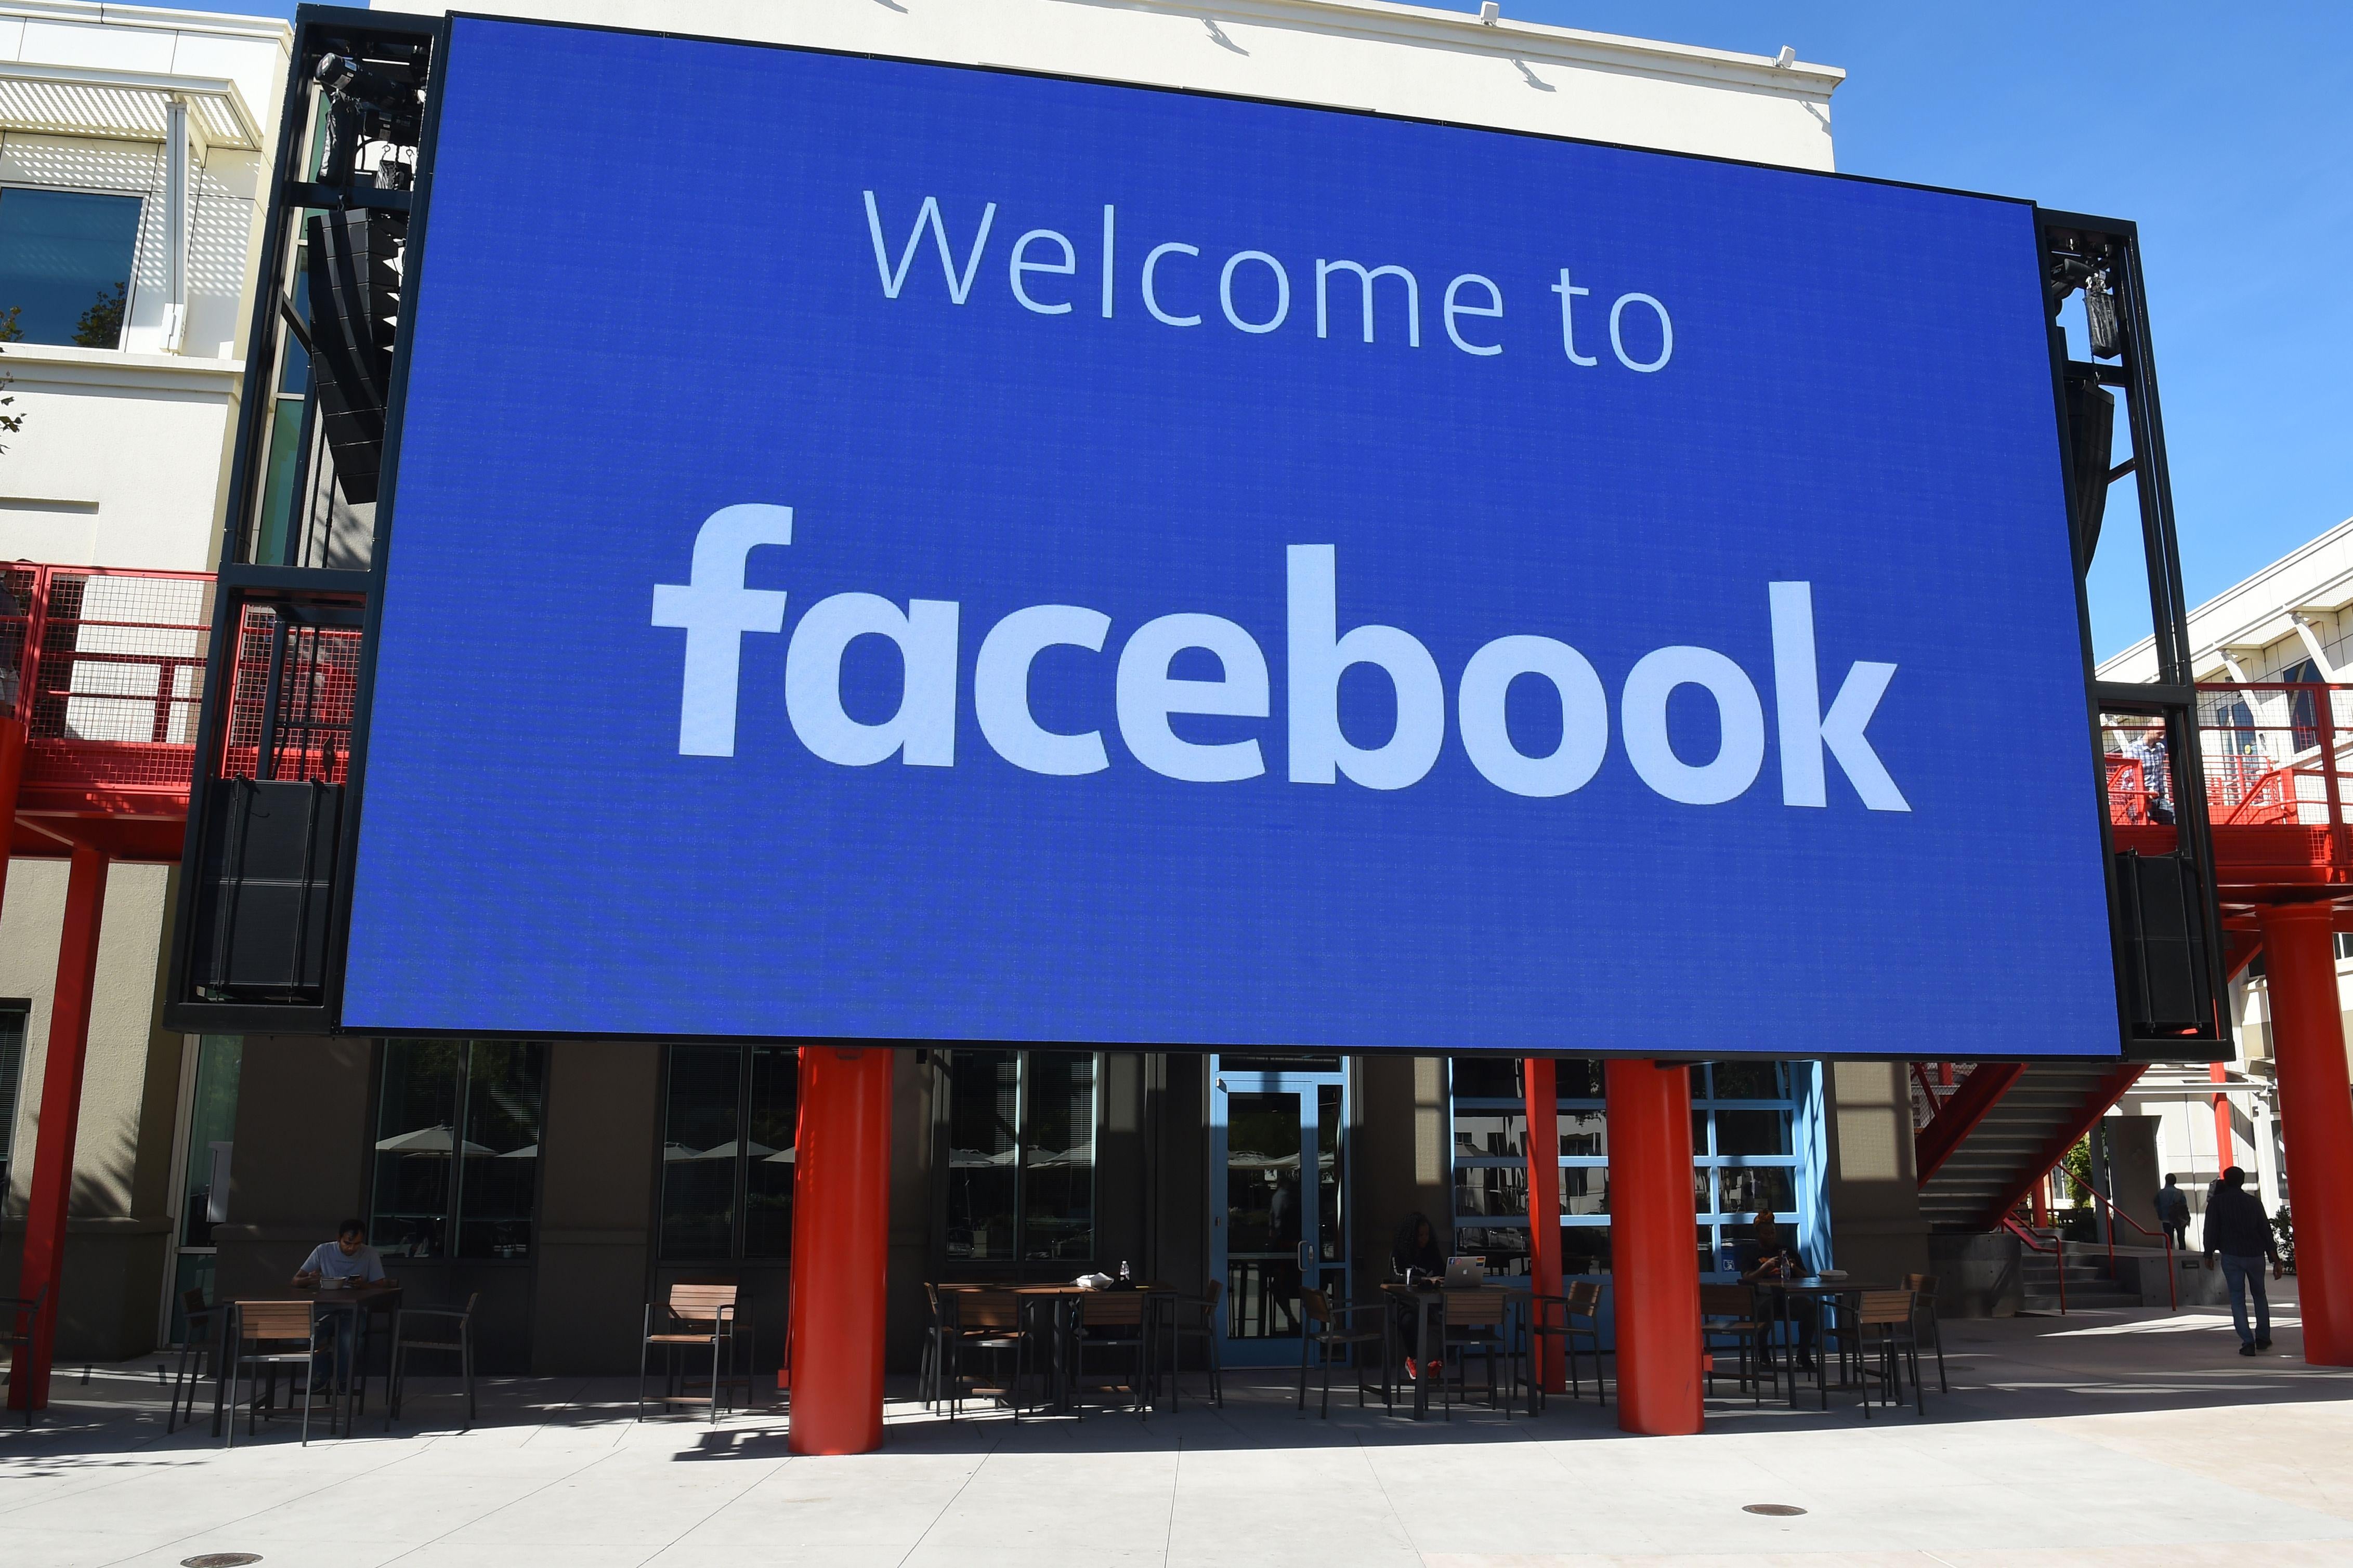 A giant sign reads "Welcome to Facebook."